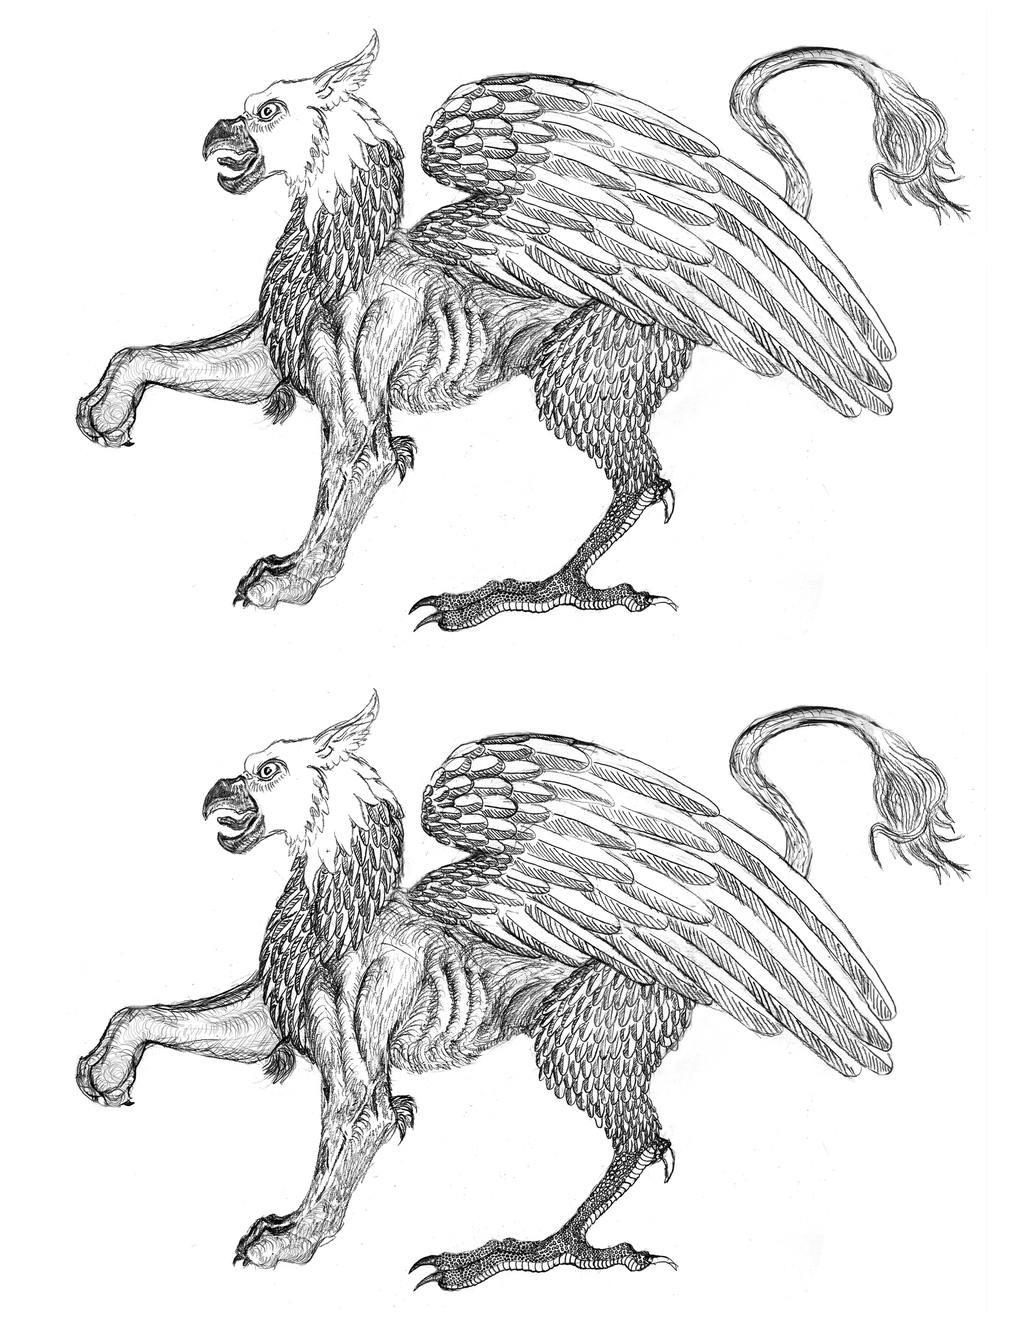 Most recent image: Gryphon